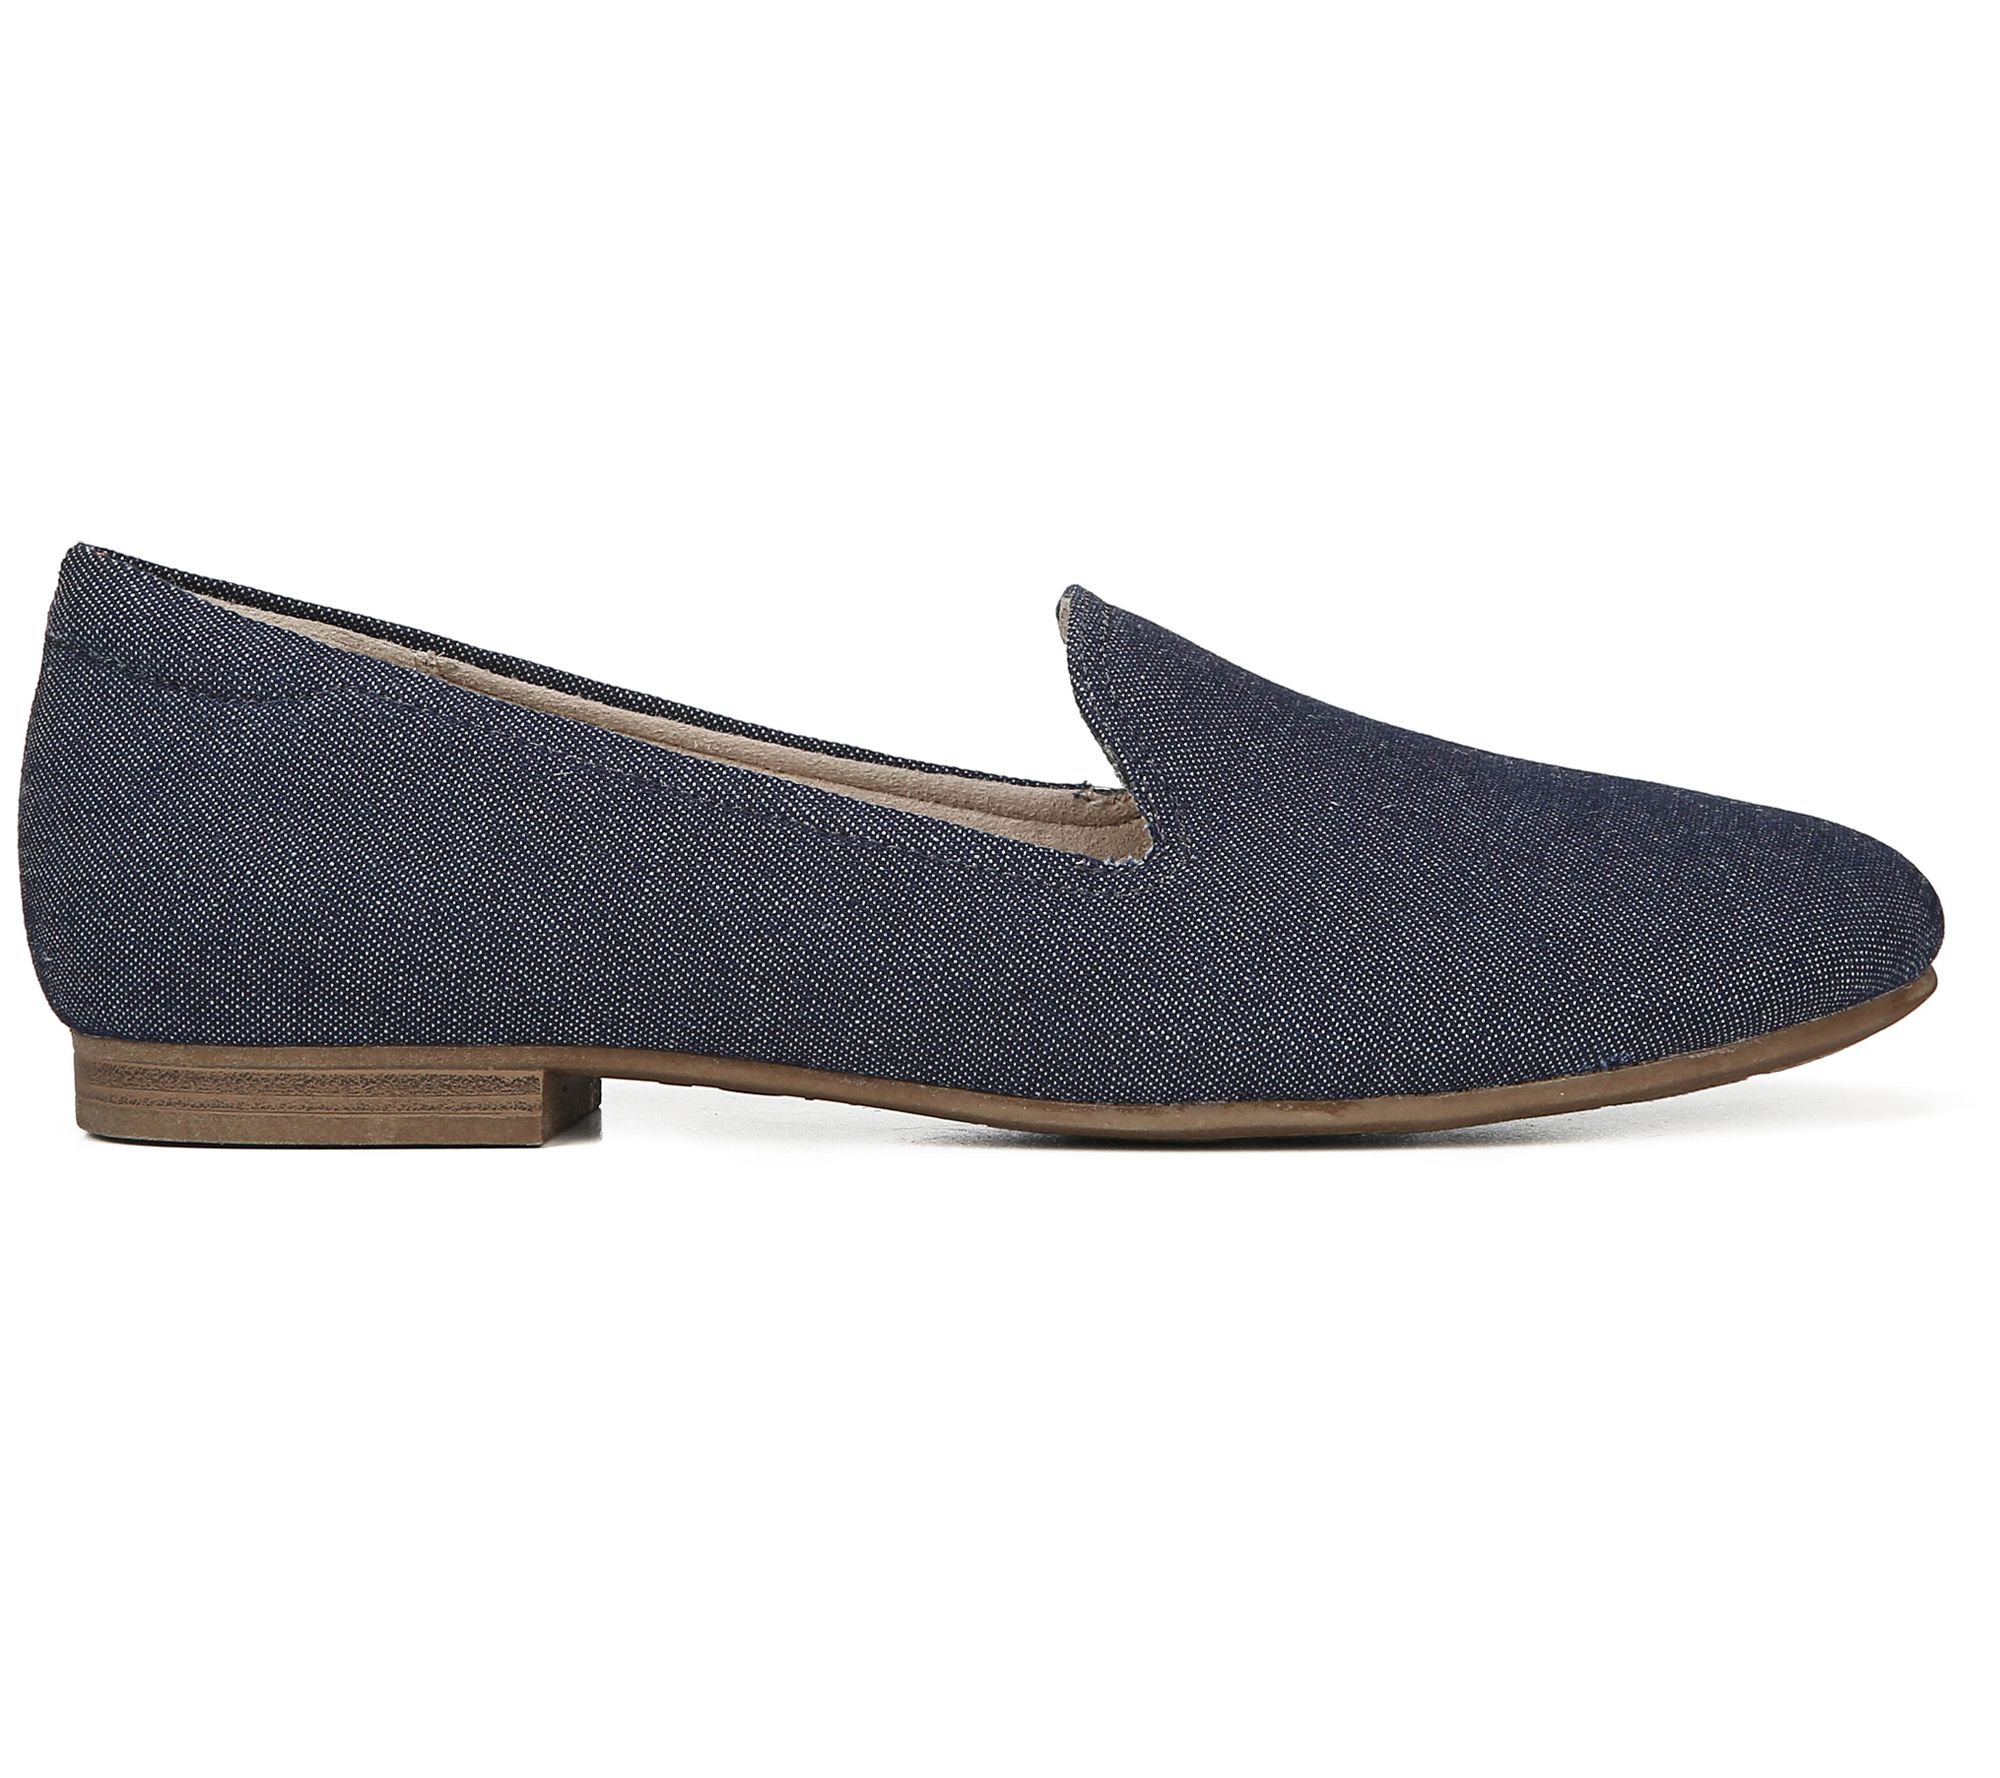 Soul Naturalizer Slip-On Flat Loafers - Alexis - QVC.com